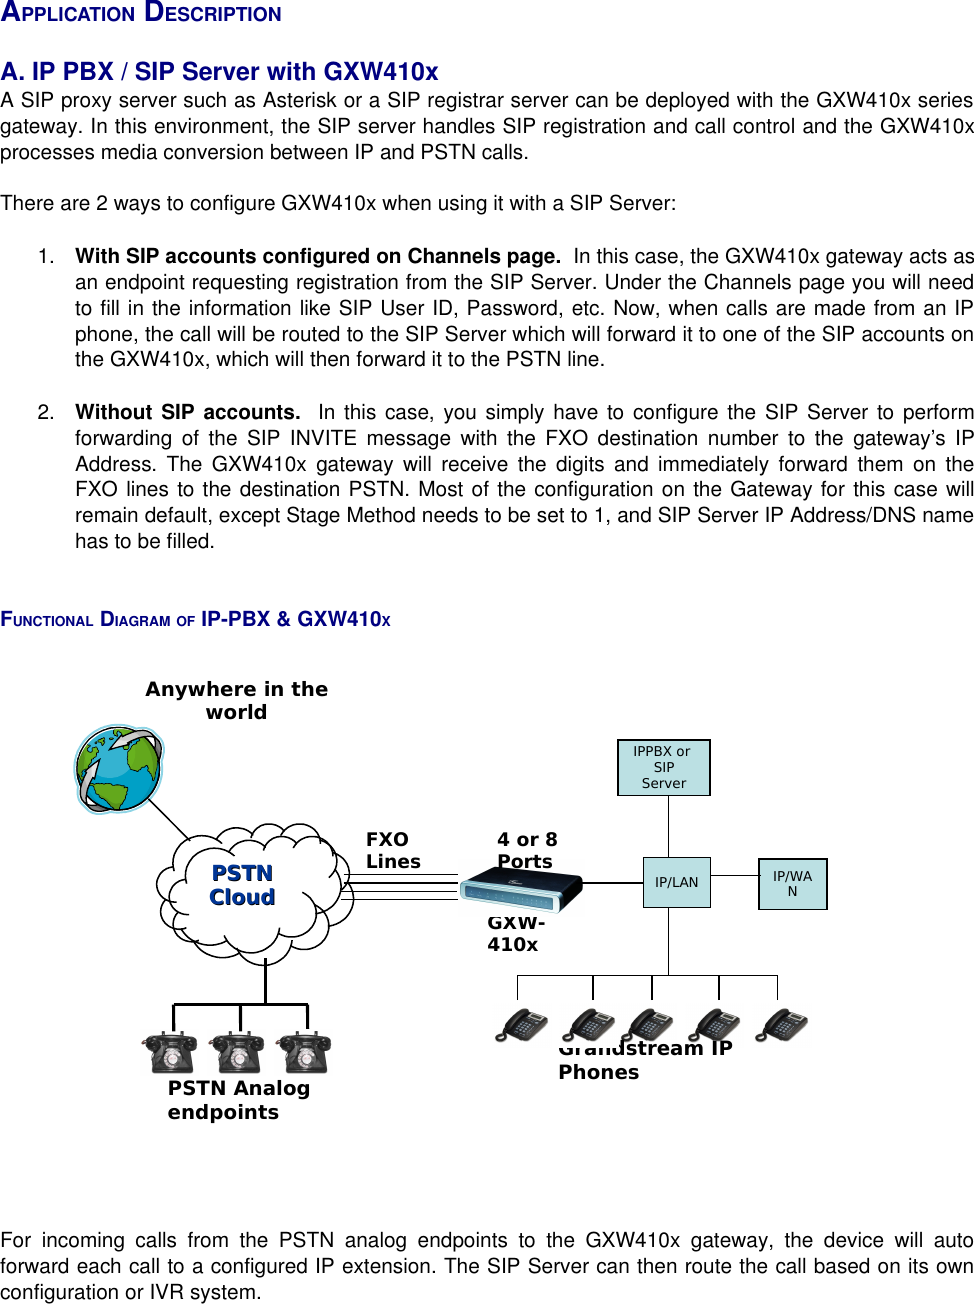 APPLICATION DESCRIPTIONA. IP PBX / SIP Server with GXW410xA SIP proxy server such as Asterisk or a SIP registrar server can be deployed with the GXW410x series gateway. In this environment, the SIP server handles SIP registration and call control and the GXW410x processes media conversion between IP and PSTN calls. There are 2 ways to configure GXW410x when using it with a SIP Server: 1. With SIP accounts configured on Channels page.  In this case, the GXW410x gateway acts as an endpoint requesting registration from the SIP Server. Under the Channels page you will need to fill in the information like SIP User ID, Password, etc. Now, when calls are made from an IP phone, the call will be routed to the SIP Server which will forward it to one of the SIP accounts on the GXW410x, which will then forward it to the PSTN line. 2. Without SIP accounts.   In this case, you simply have to configure the SIP Server to perform forwarding of the SIP INVITE message with the FXO destination number to the gateway’s IP Address. The GXW410x gateway will receive the digits and immediately forward them on the FXO lines to the destination PSTN. Most of the configuration on the Gateway for this case will remain default, except Stage Method needs to be set to 1, and SIP Server IP Address/DNS name has to be filled.FUNCTIONAL DIAGRAM OF IP-PBX &amp; GXW410XFor incoming calls from the PSTN analog endpoints to the GXW410x gateway, the device will auto forward each call to a configured IP extension. The SIP Server can then route the call based on its own configuration or IVR system.PSTNPSTNCloudCloudAnywhere in the worldGXW-410x4 or 8 PortsFXO LinesPSTN Analog endpointsGrandstream IP PhonesIPPBX or SIP ServerIP/LAN IP/WAN